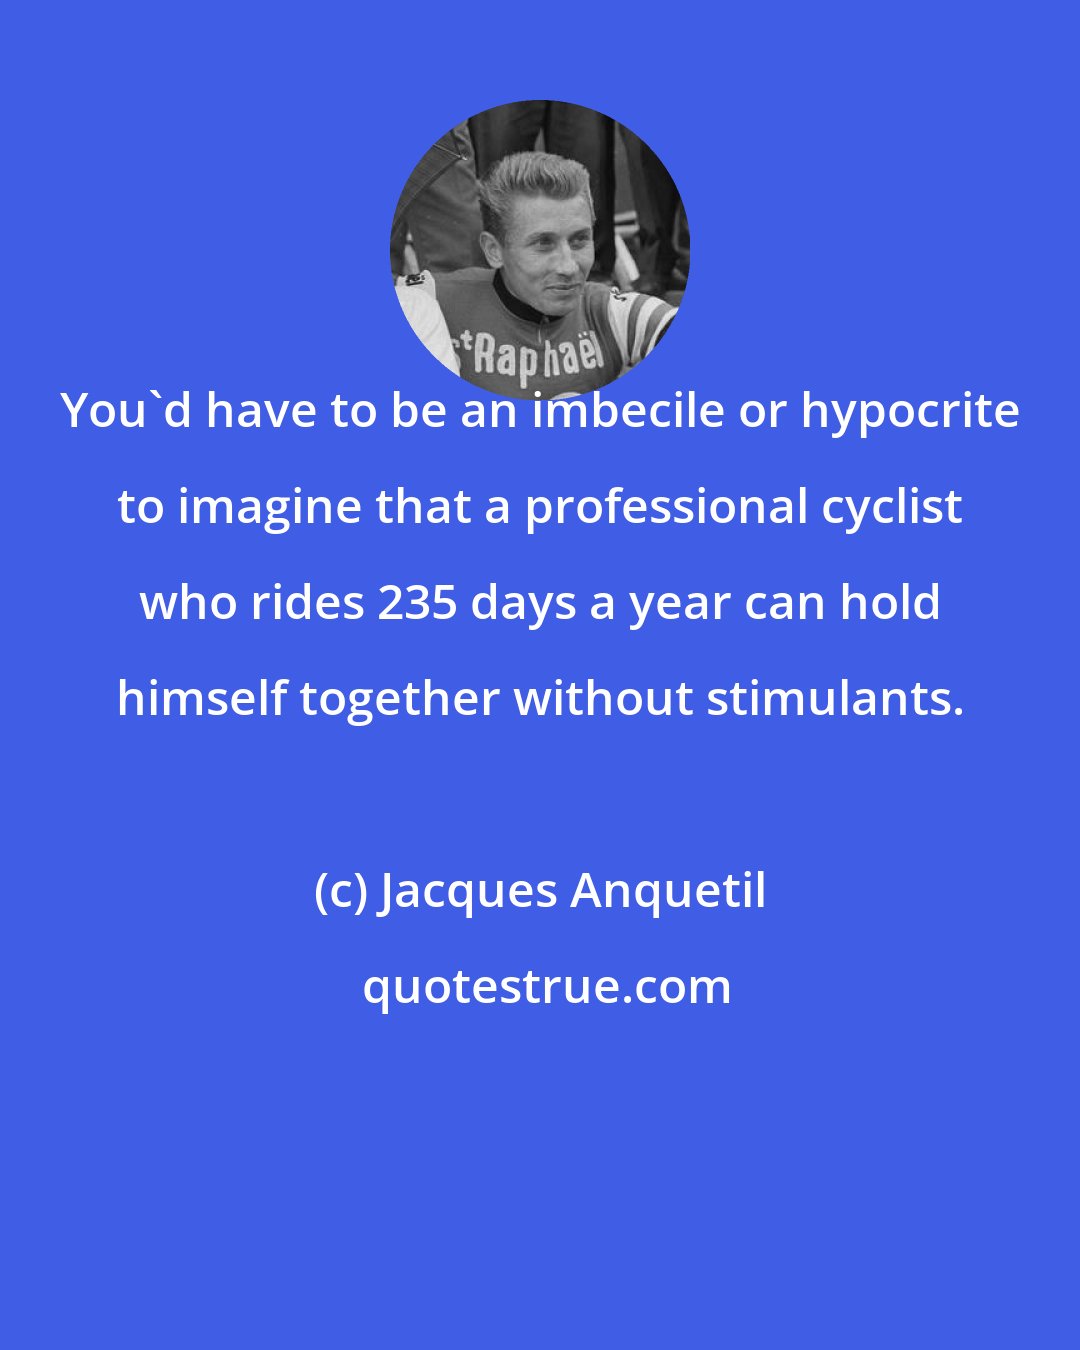 Jacques Anquetil: You'd have to be an imbecile or hypocrite to imagine that a professional cyclist who rides 235 days a year can hold himself together without stimulants.